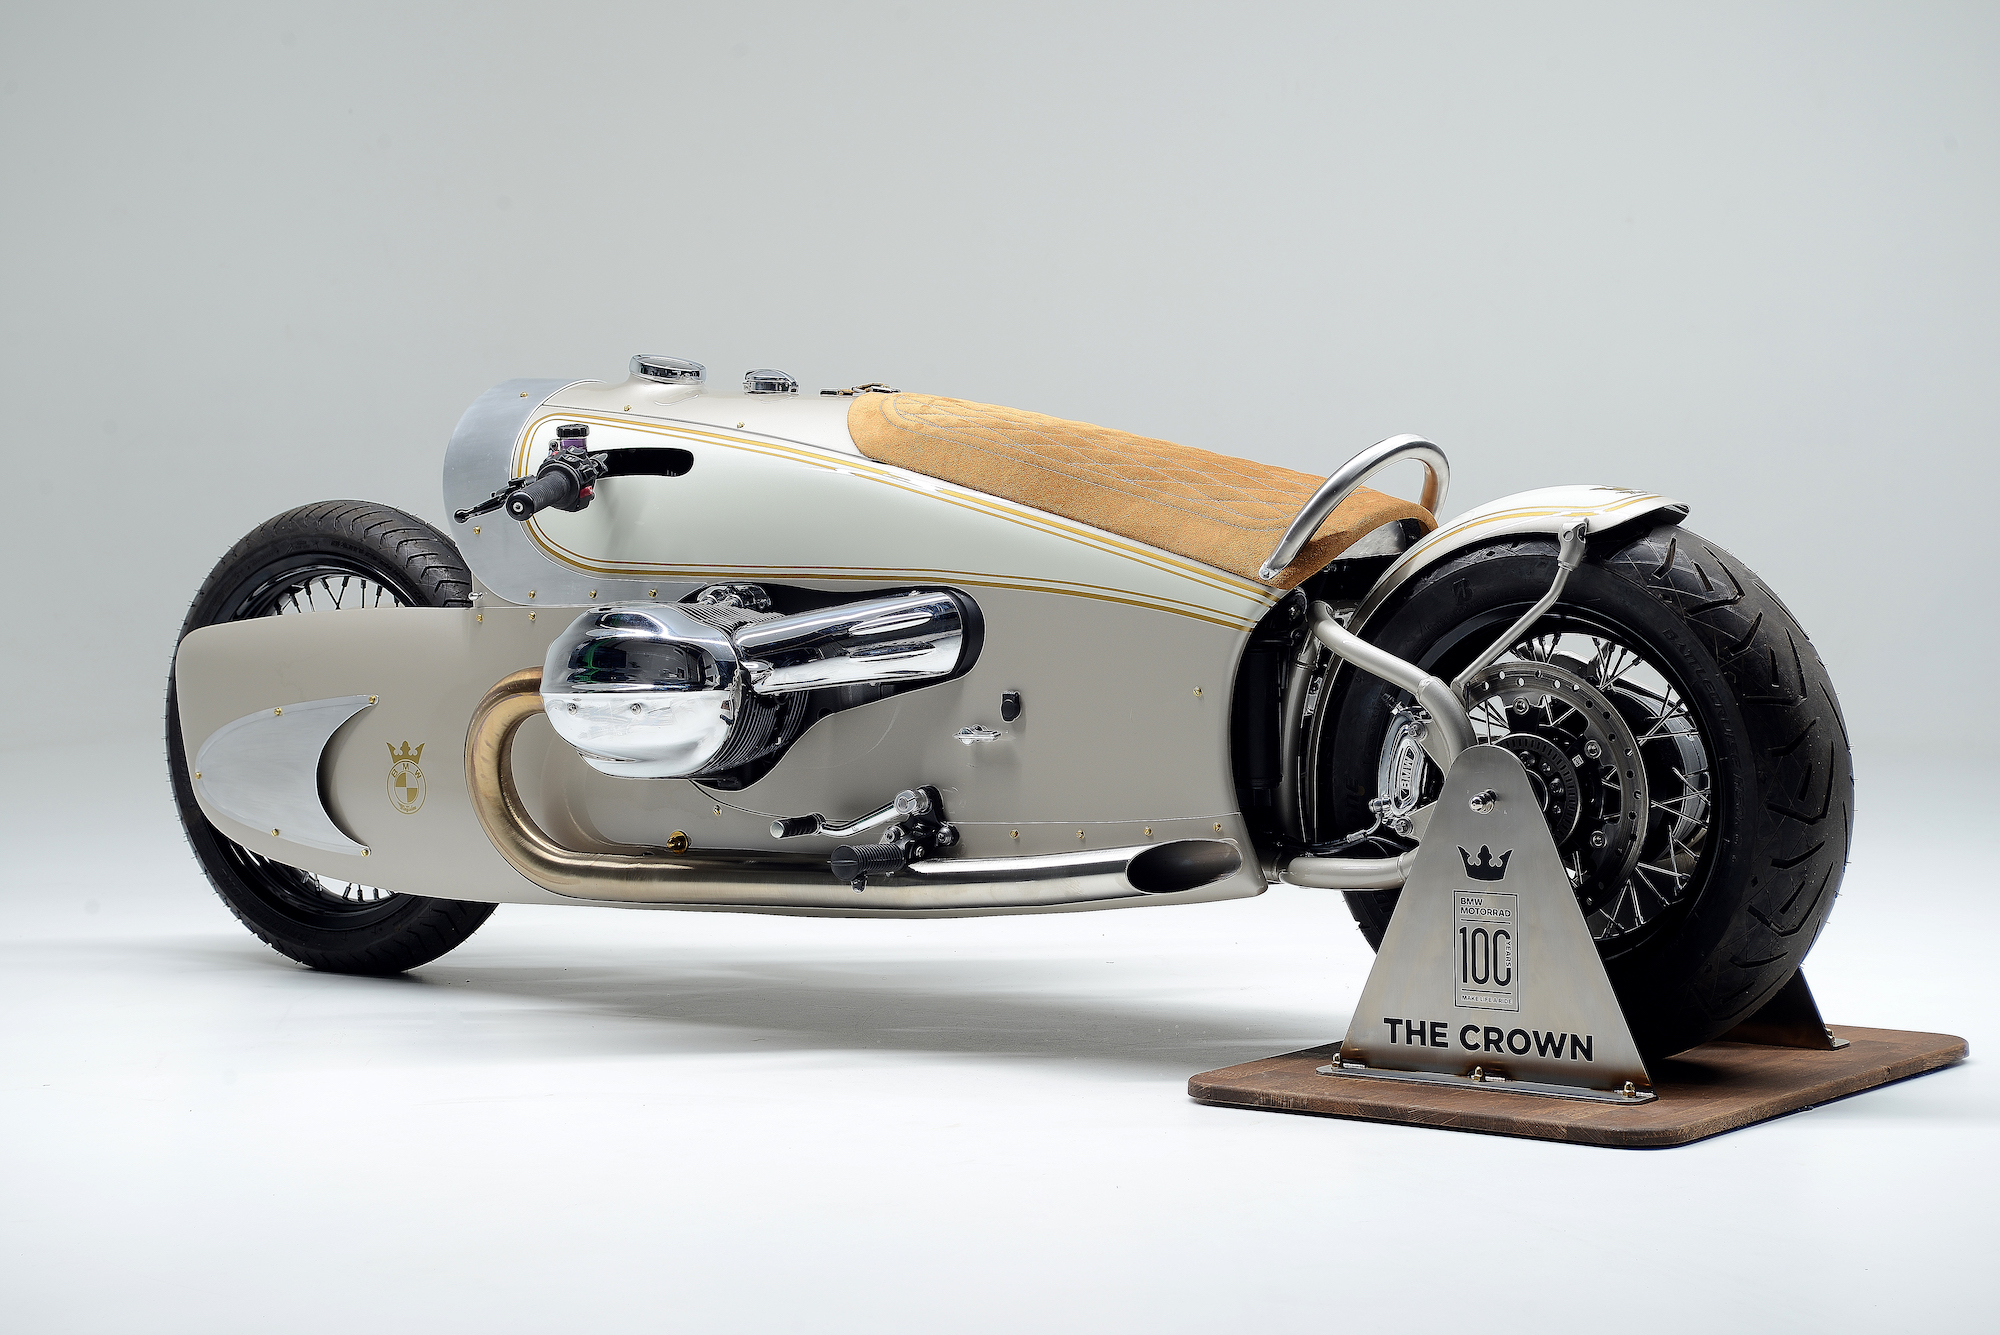 A view of BMW R18 “The Crown” - created to celebrate 100 years of BMW Motorrad. Media sourced from BMW.